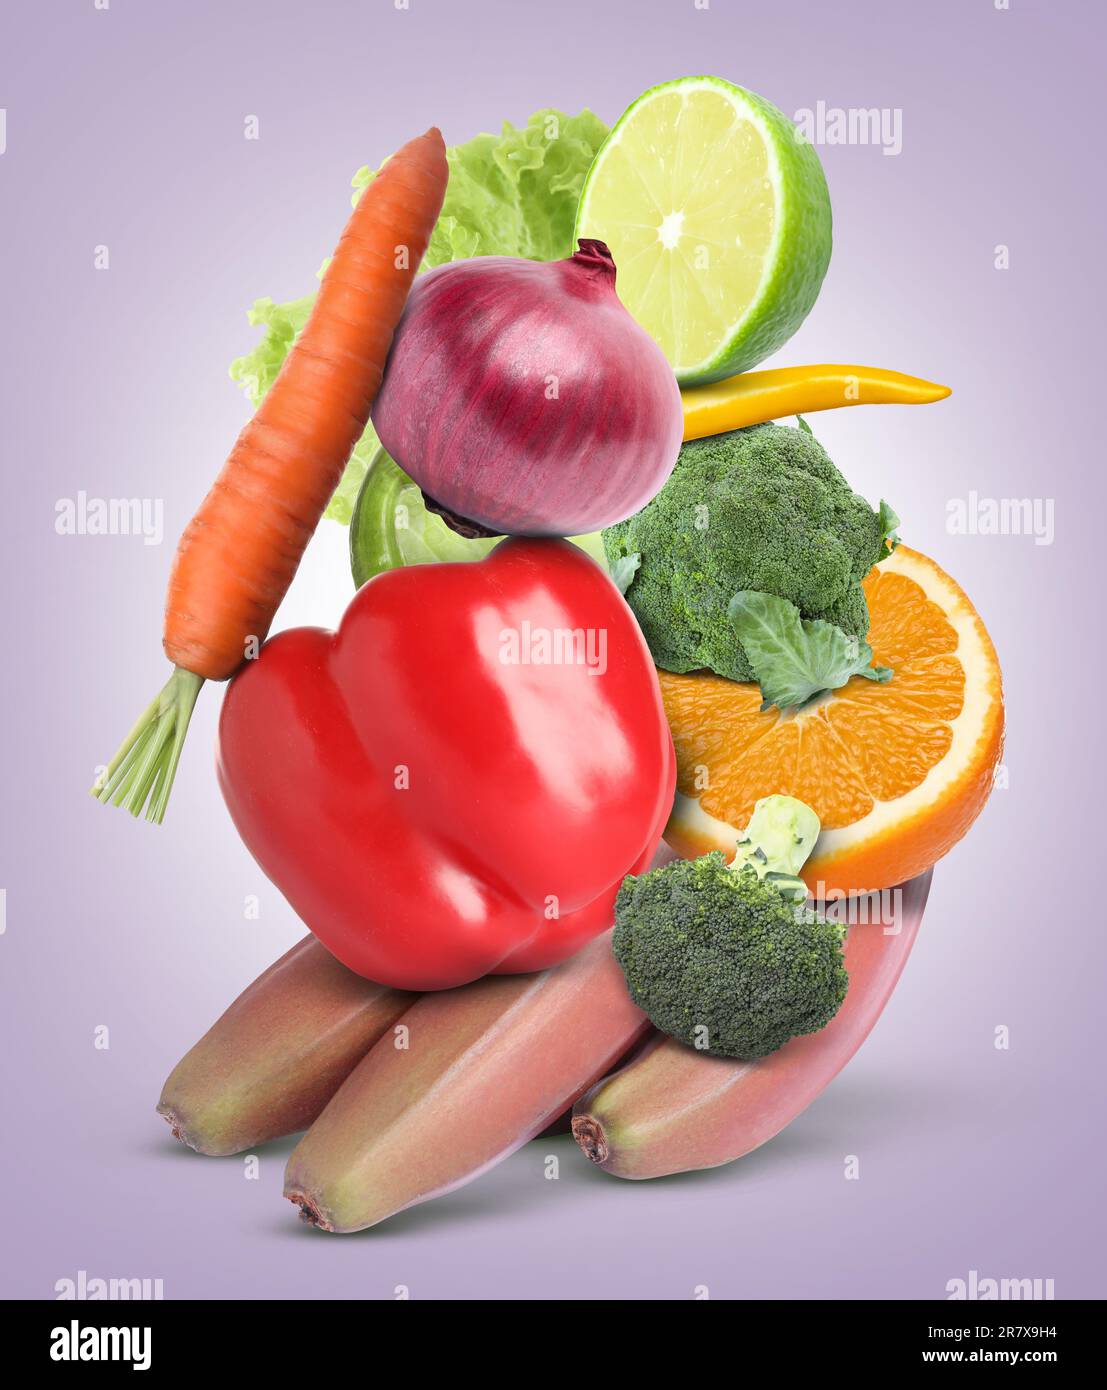 Stack of different vegetables and fruits on pale light violet background Stock Photo